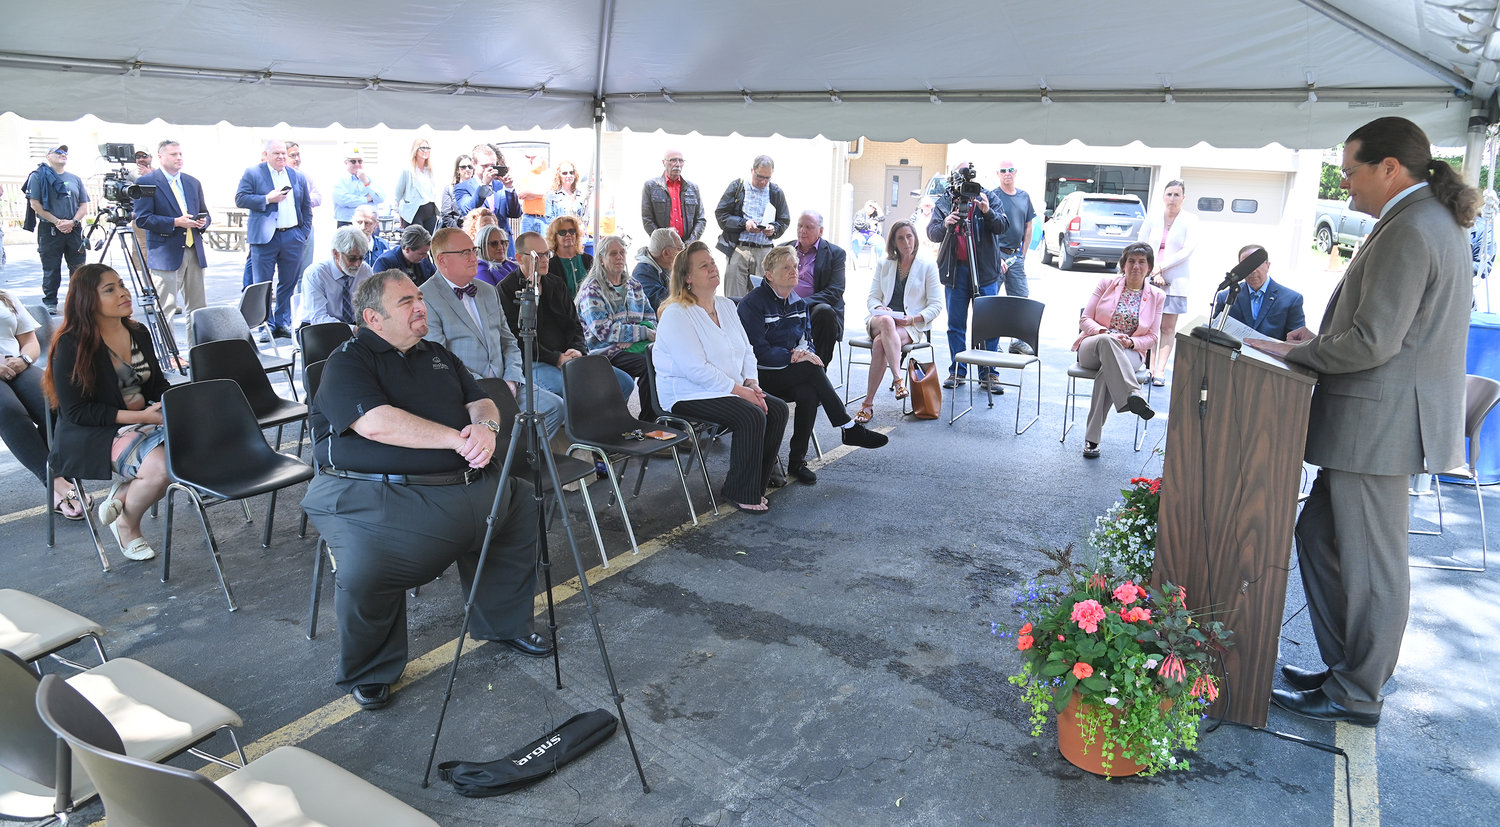 Upstate East Director of Development at NYS Homes and Community Renewal Darren Scott speaks about the Colonial II project during a ceremony to mark the start of the project in Rome on Wednesday.